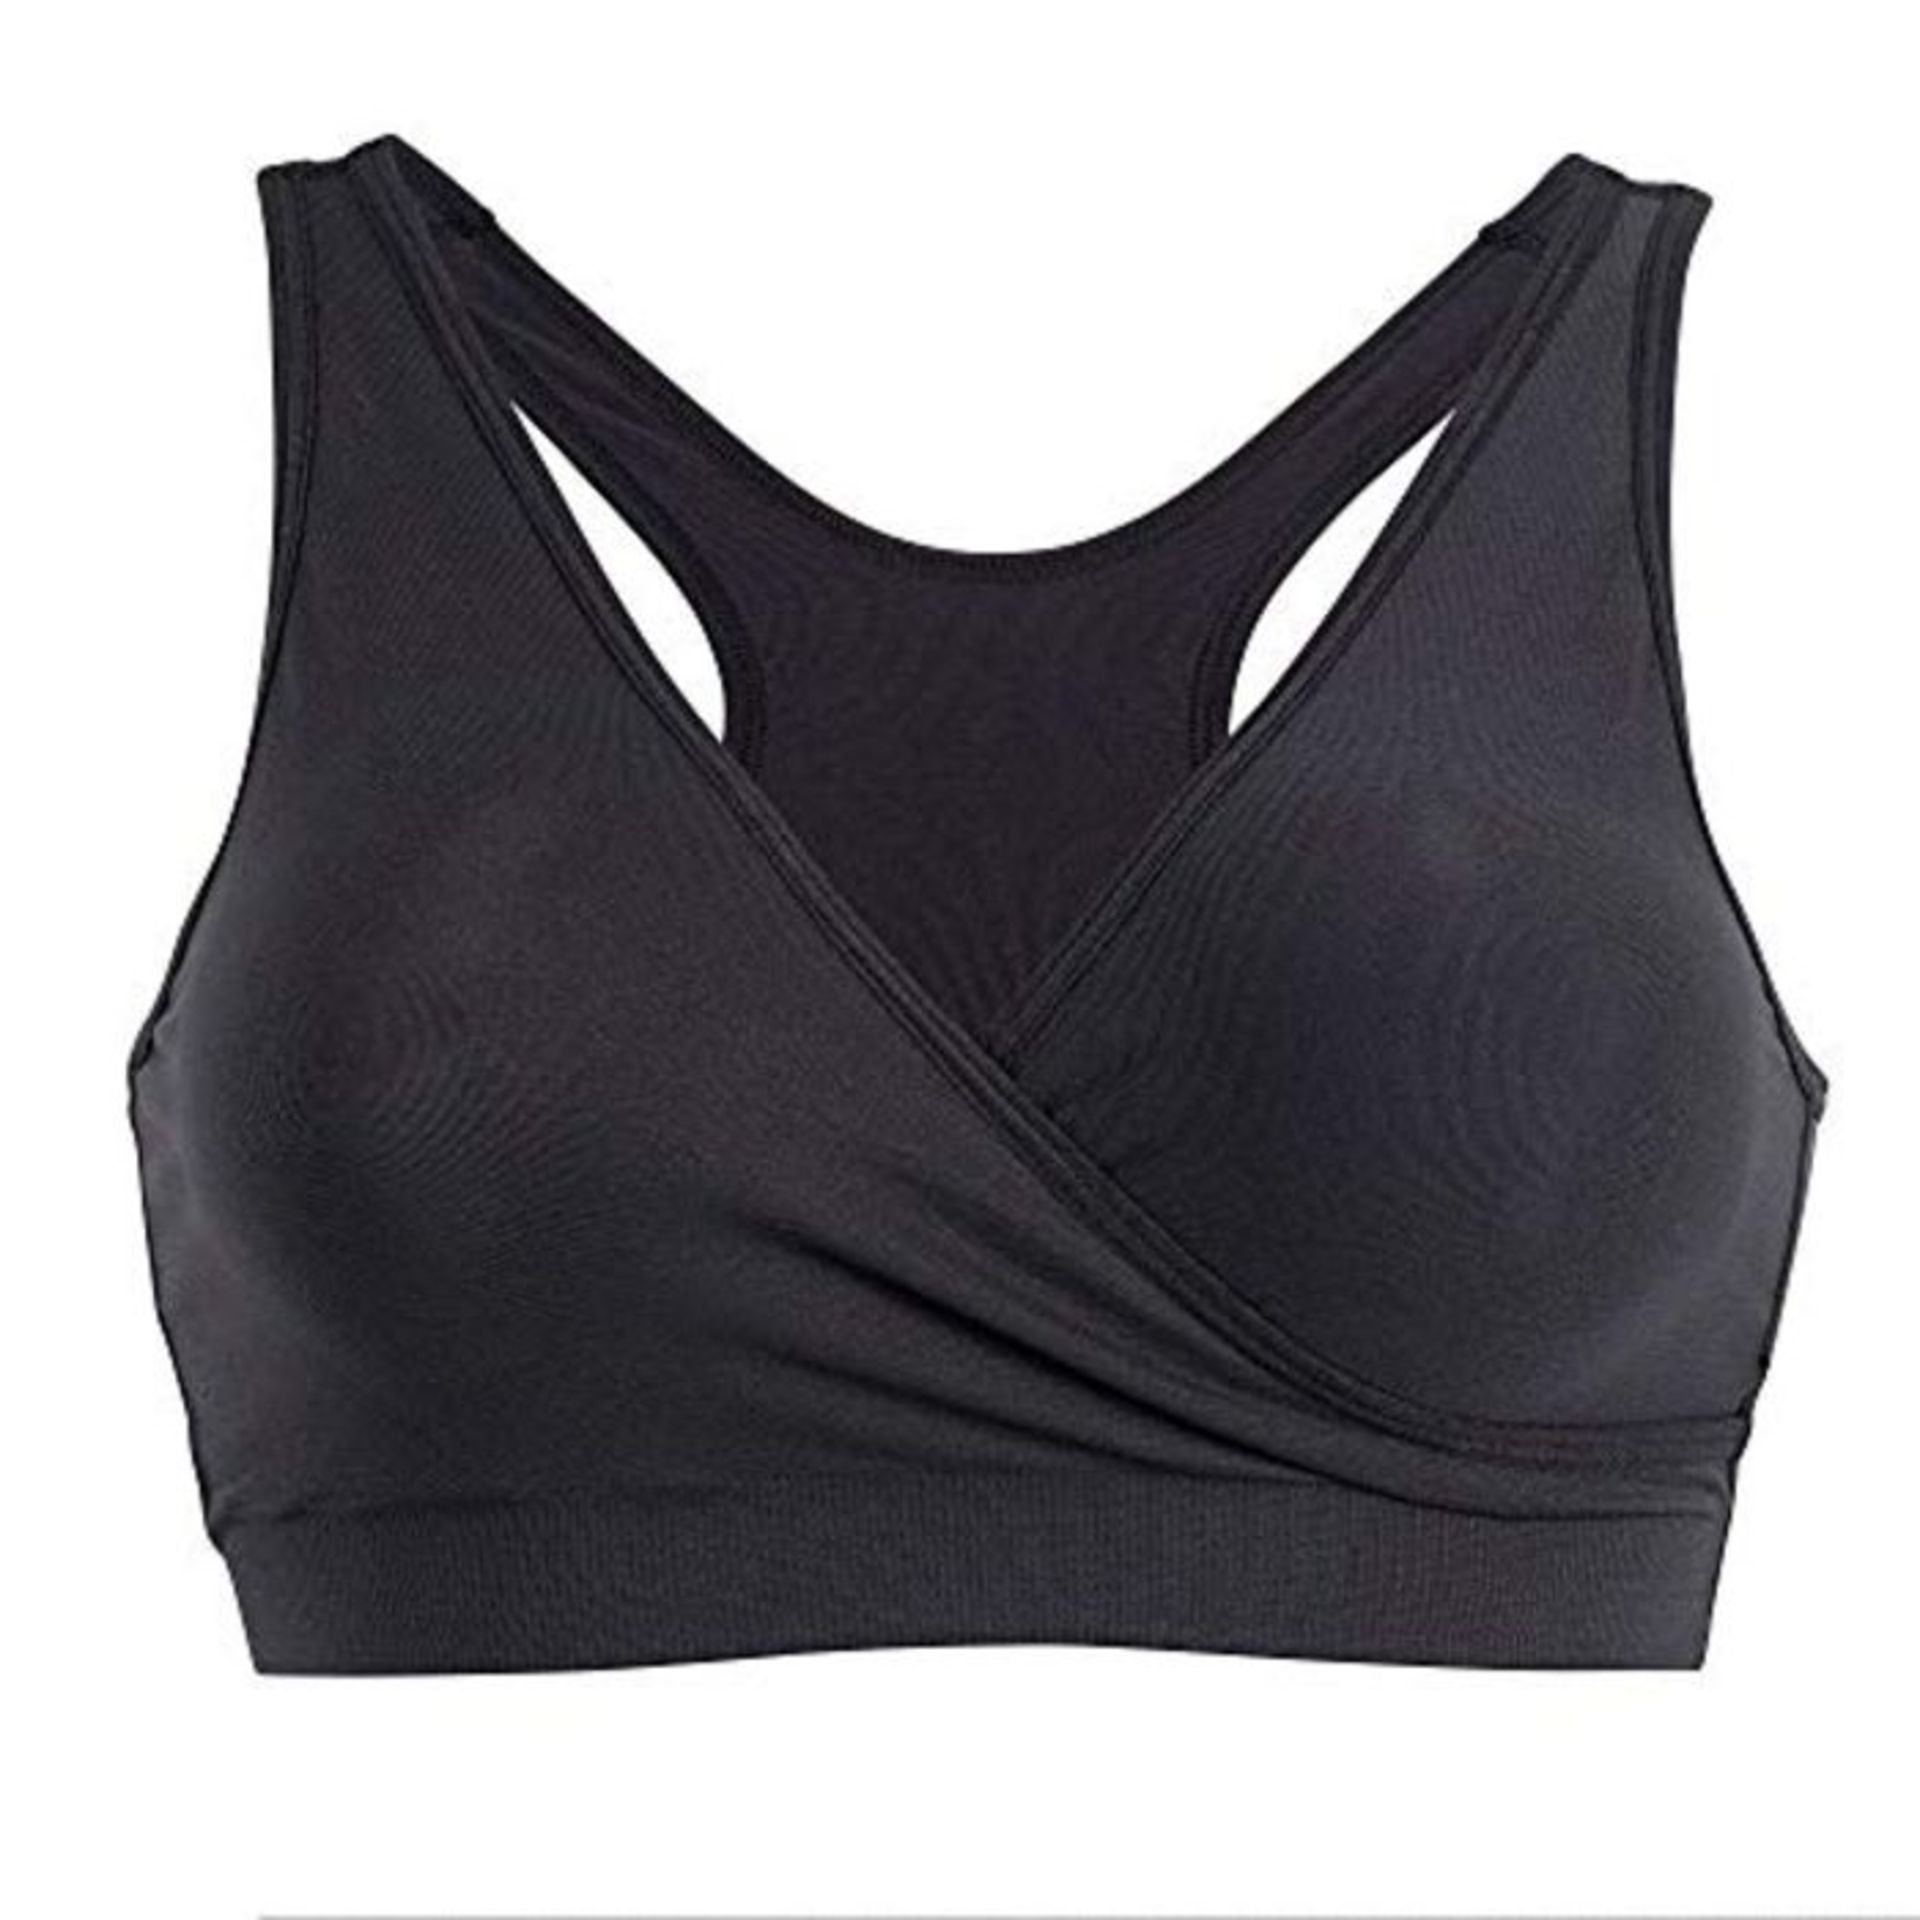 Medela Women's Sleep Bra - Seamless Bra With Stretch Fabric, for Comfortable Support A